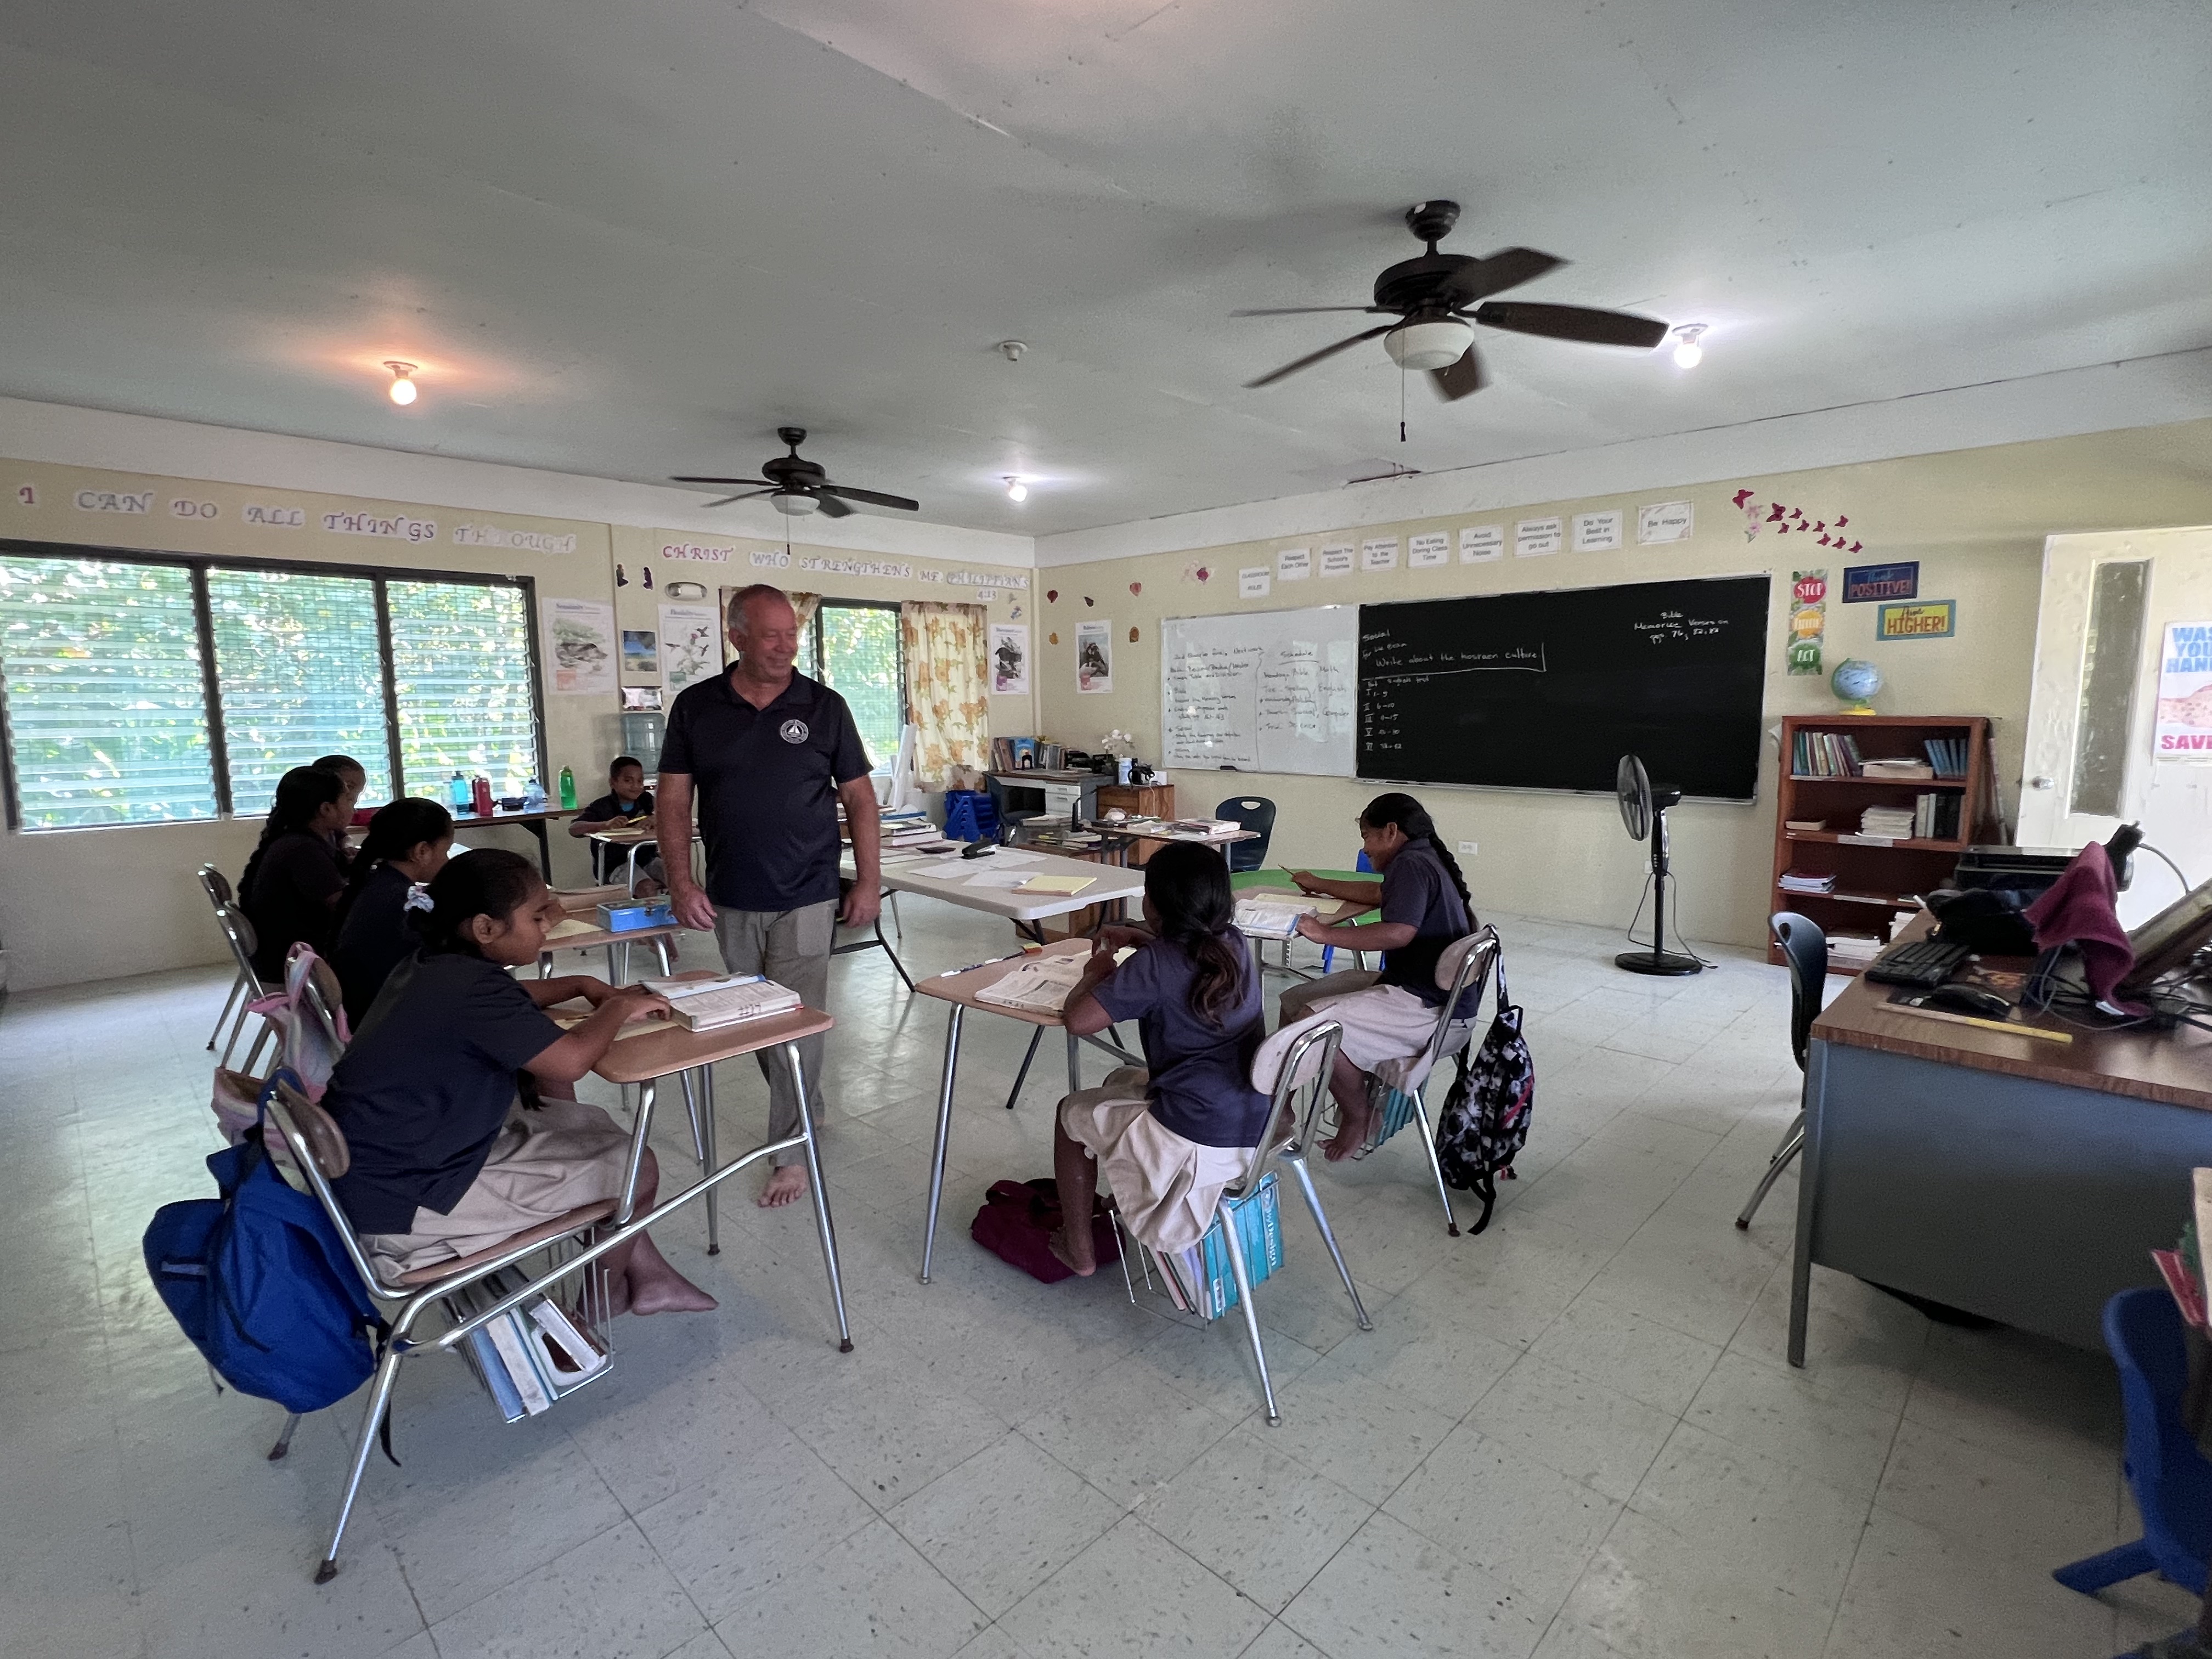 Arne Nielsen visits with students at the Adventist mission school in Kosrae, in the Guam-Micronesia Mission.